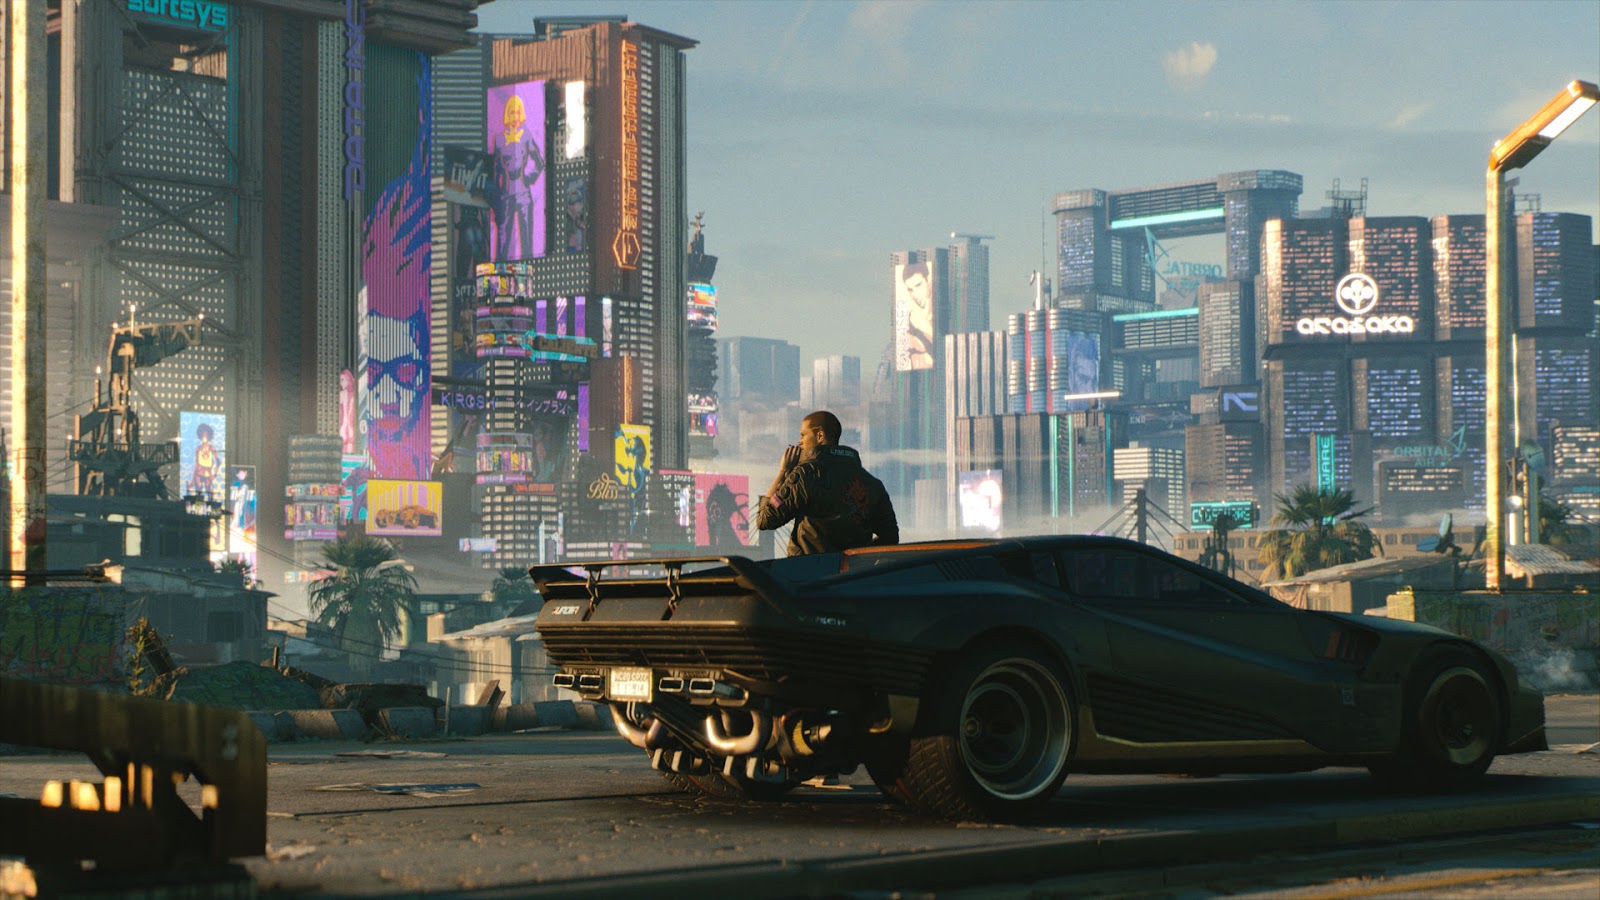 Cyberpunk 2077 - Official E3 2018 Trailer & Interview with ... - 